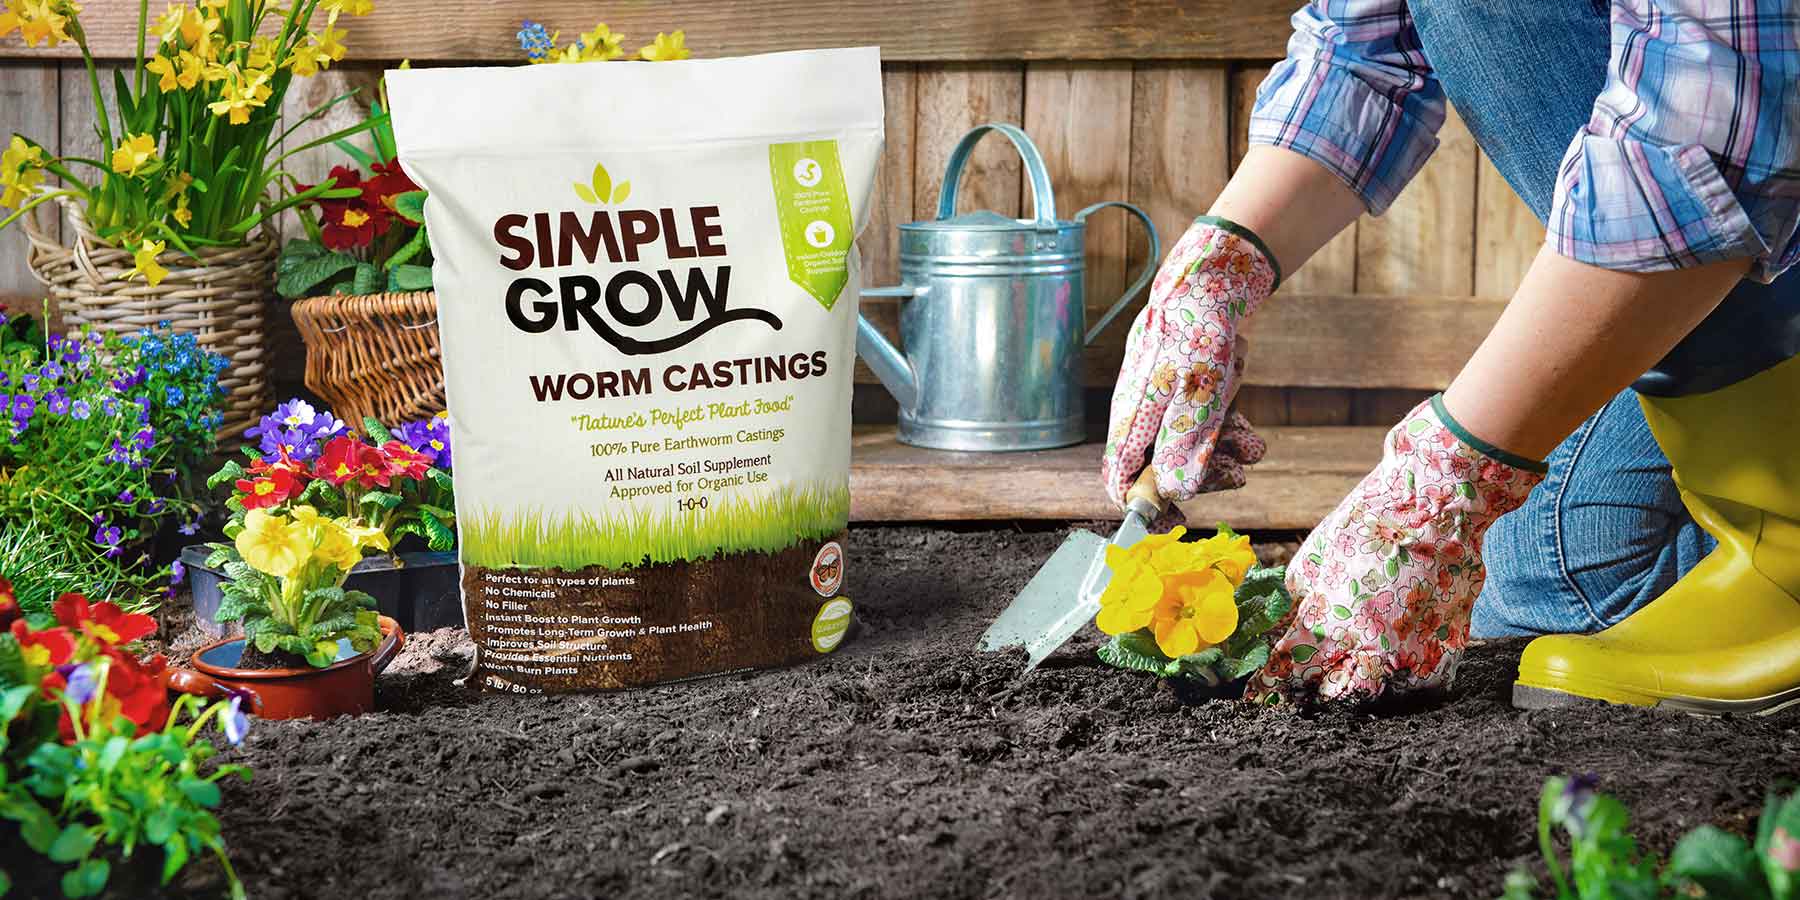 What Worm Bedding is Best for Worm Composting? - Simple Grow